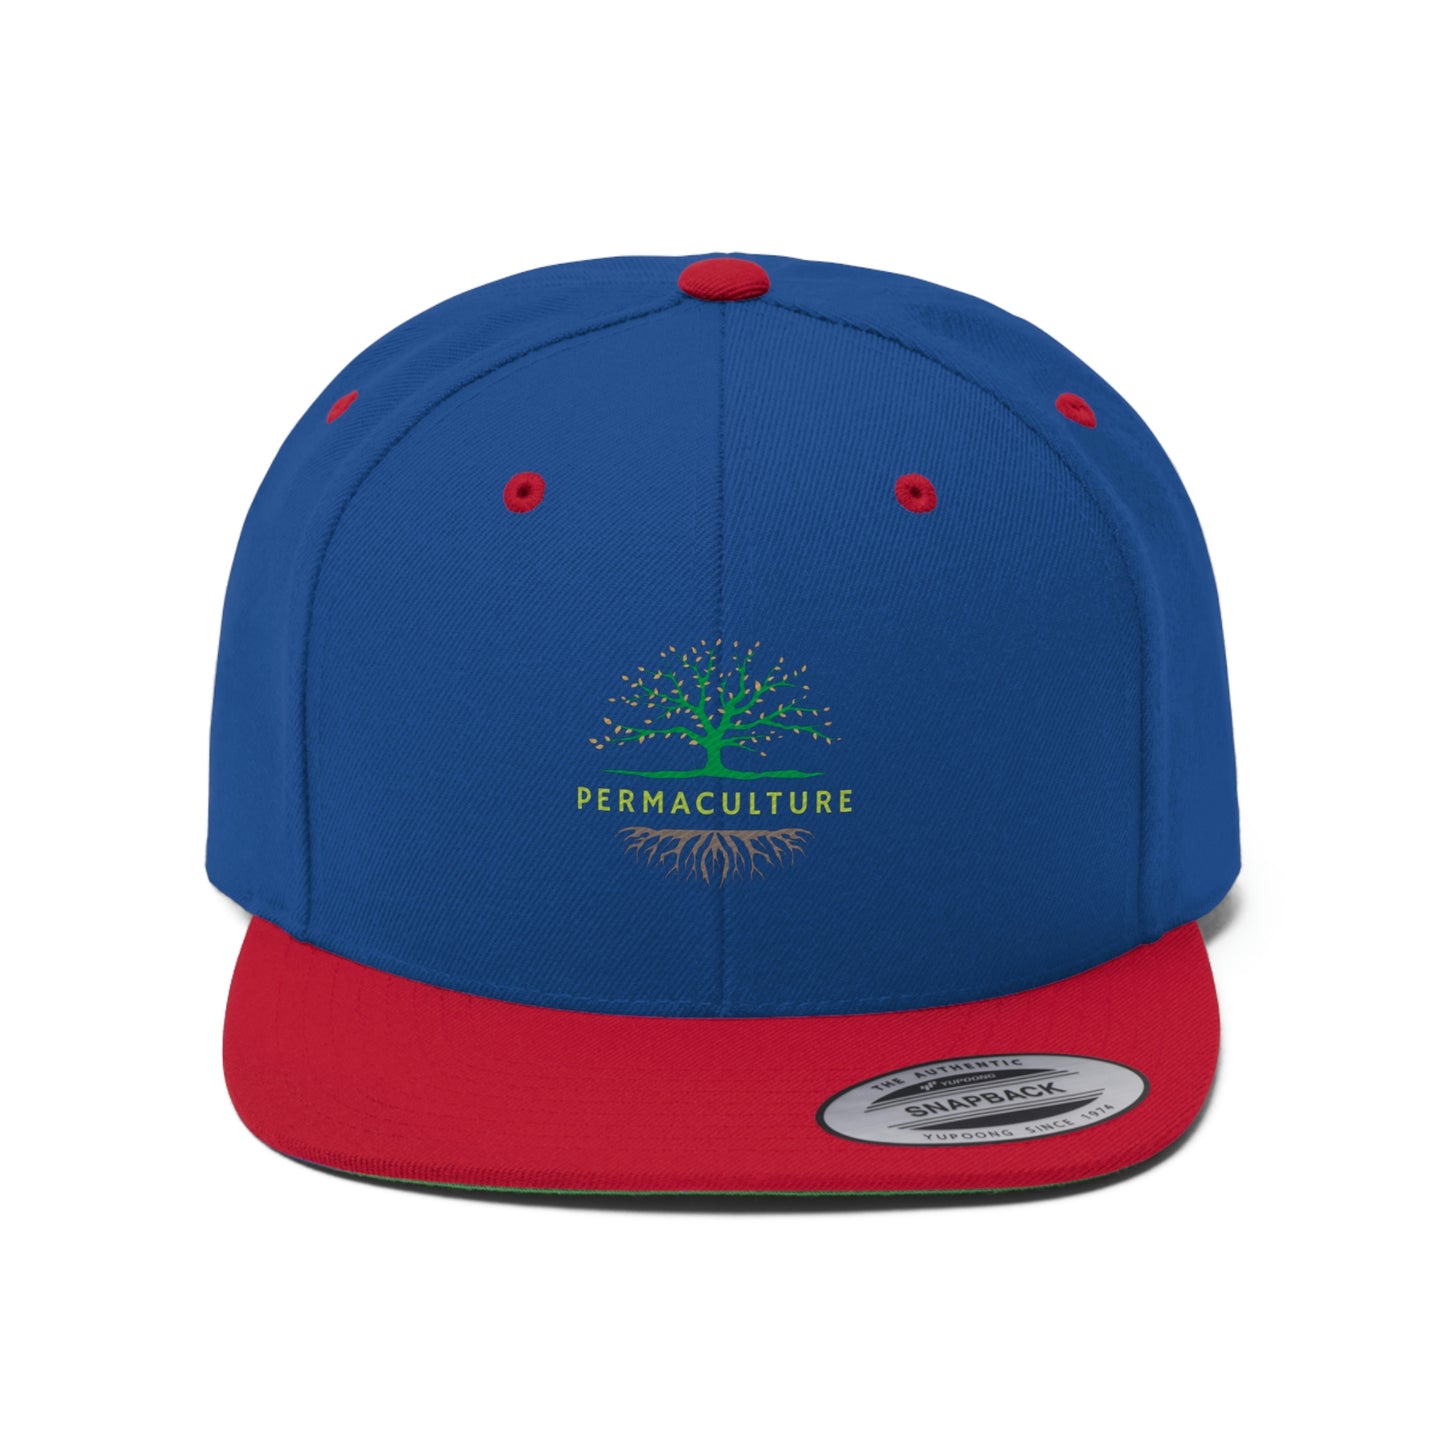 Permaculture Flat Bill Hat